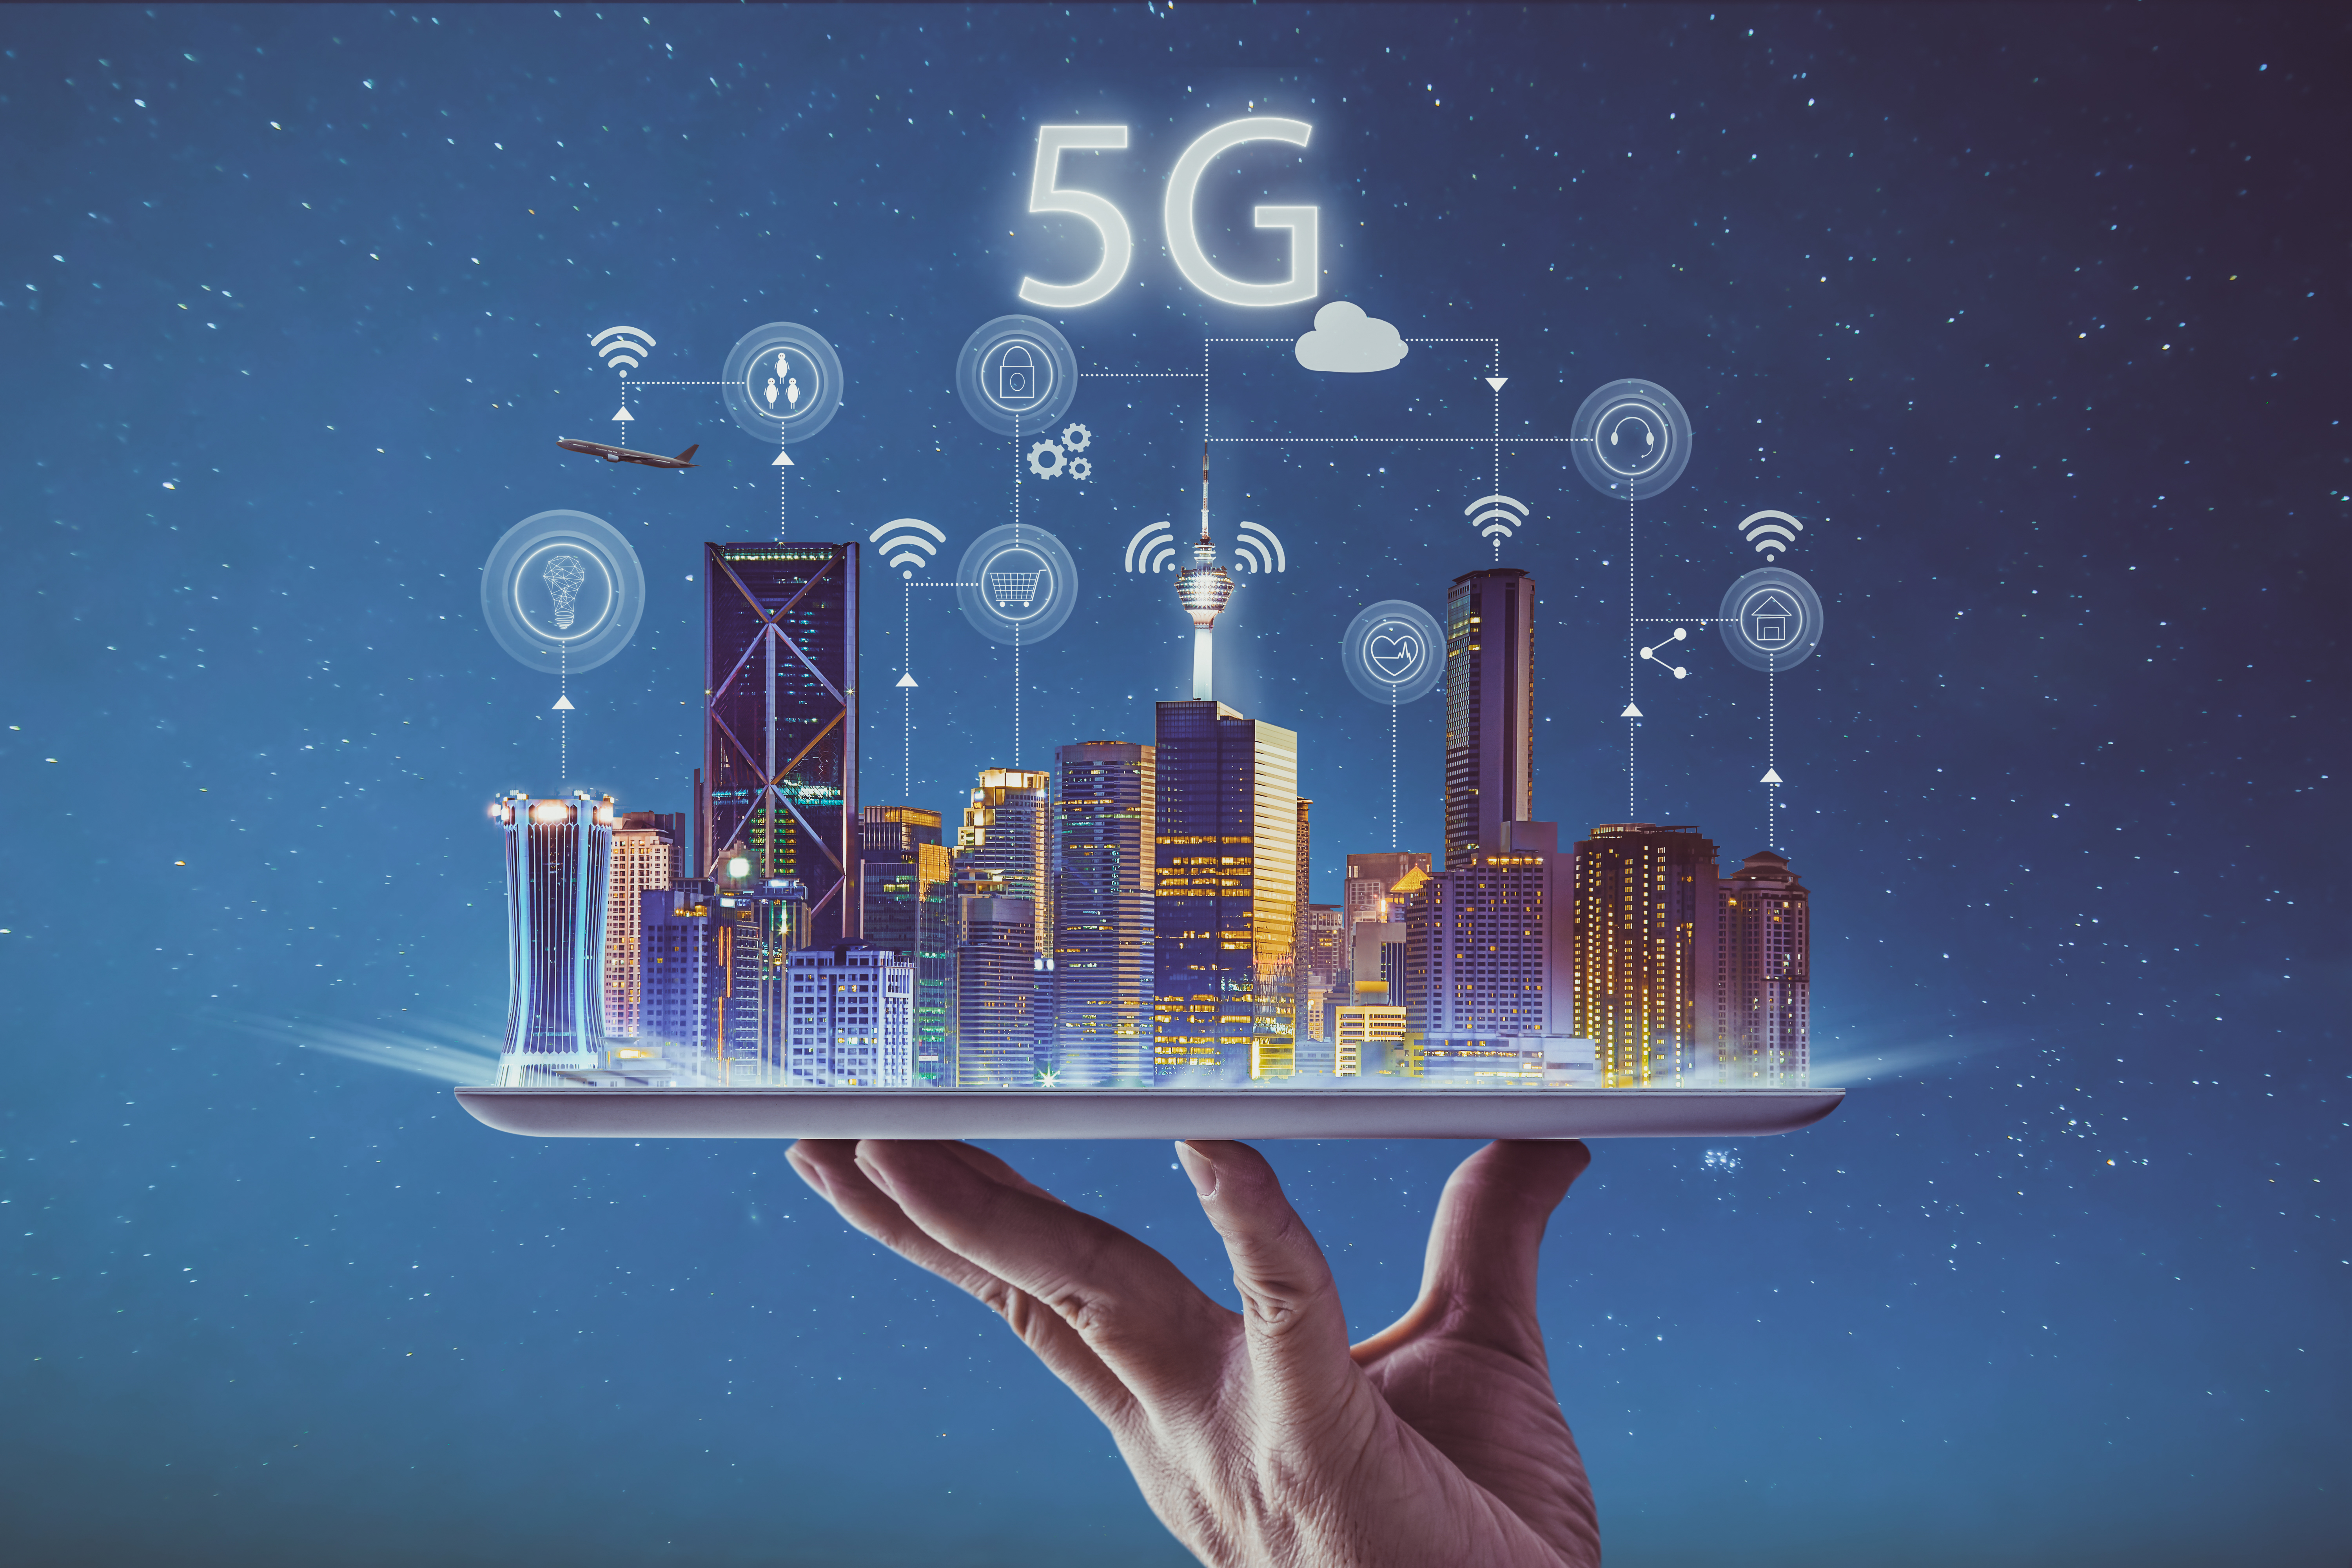 Warnings about 5G in C-Band, Hype or Reality?